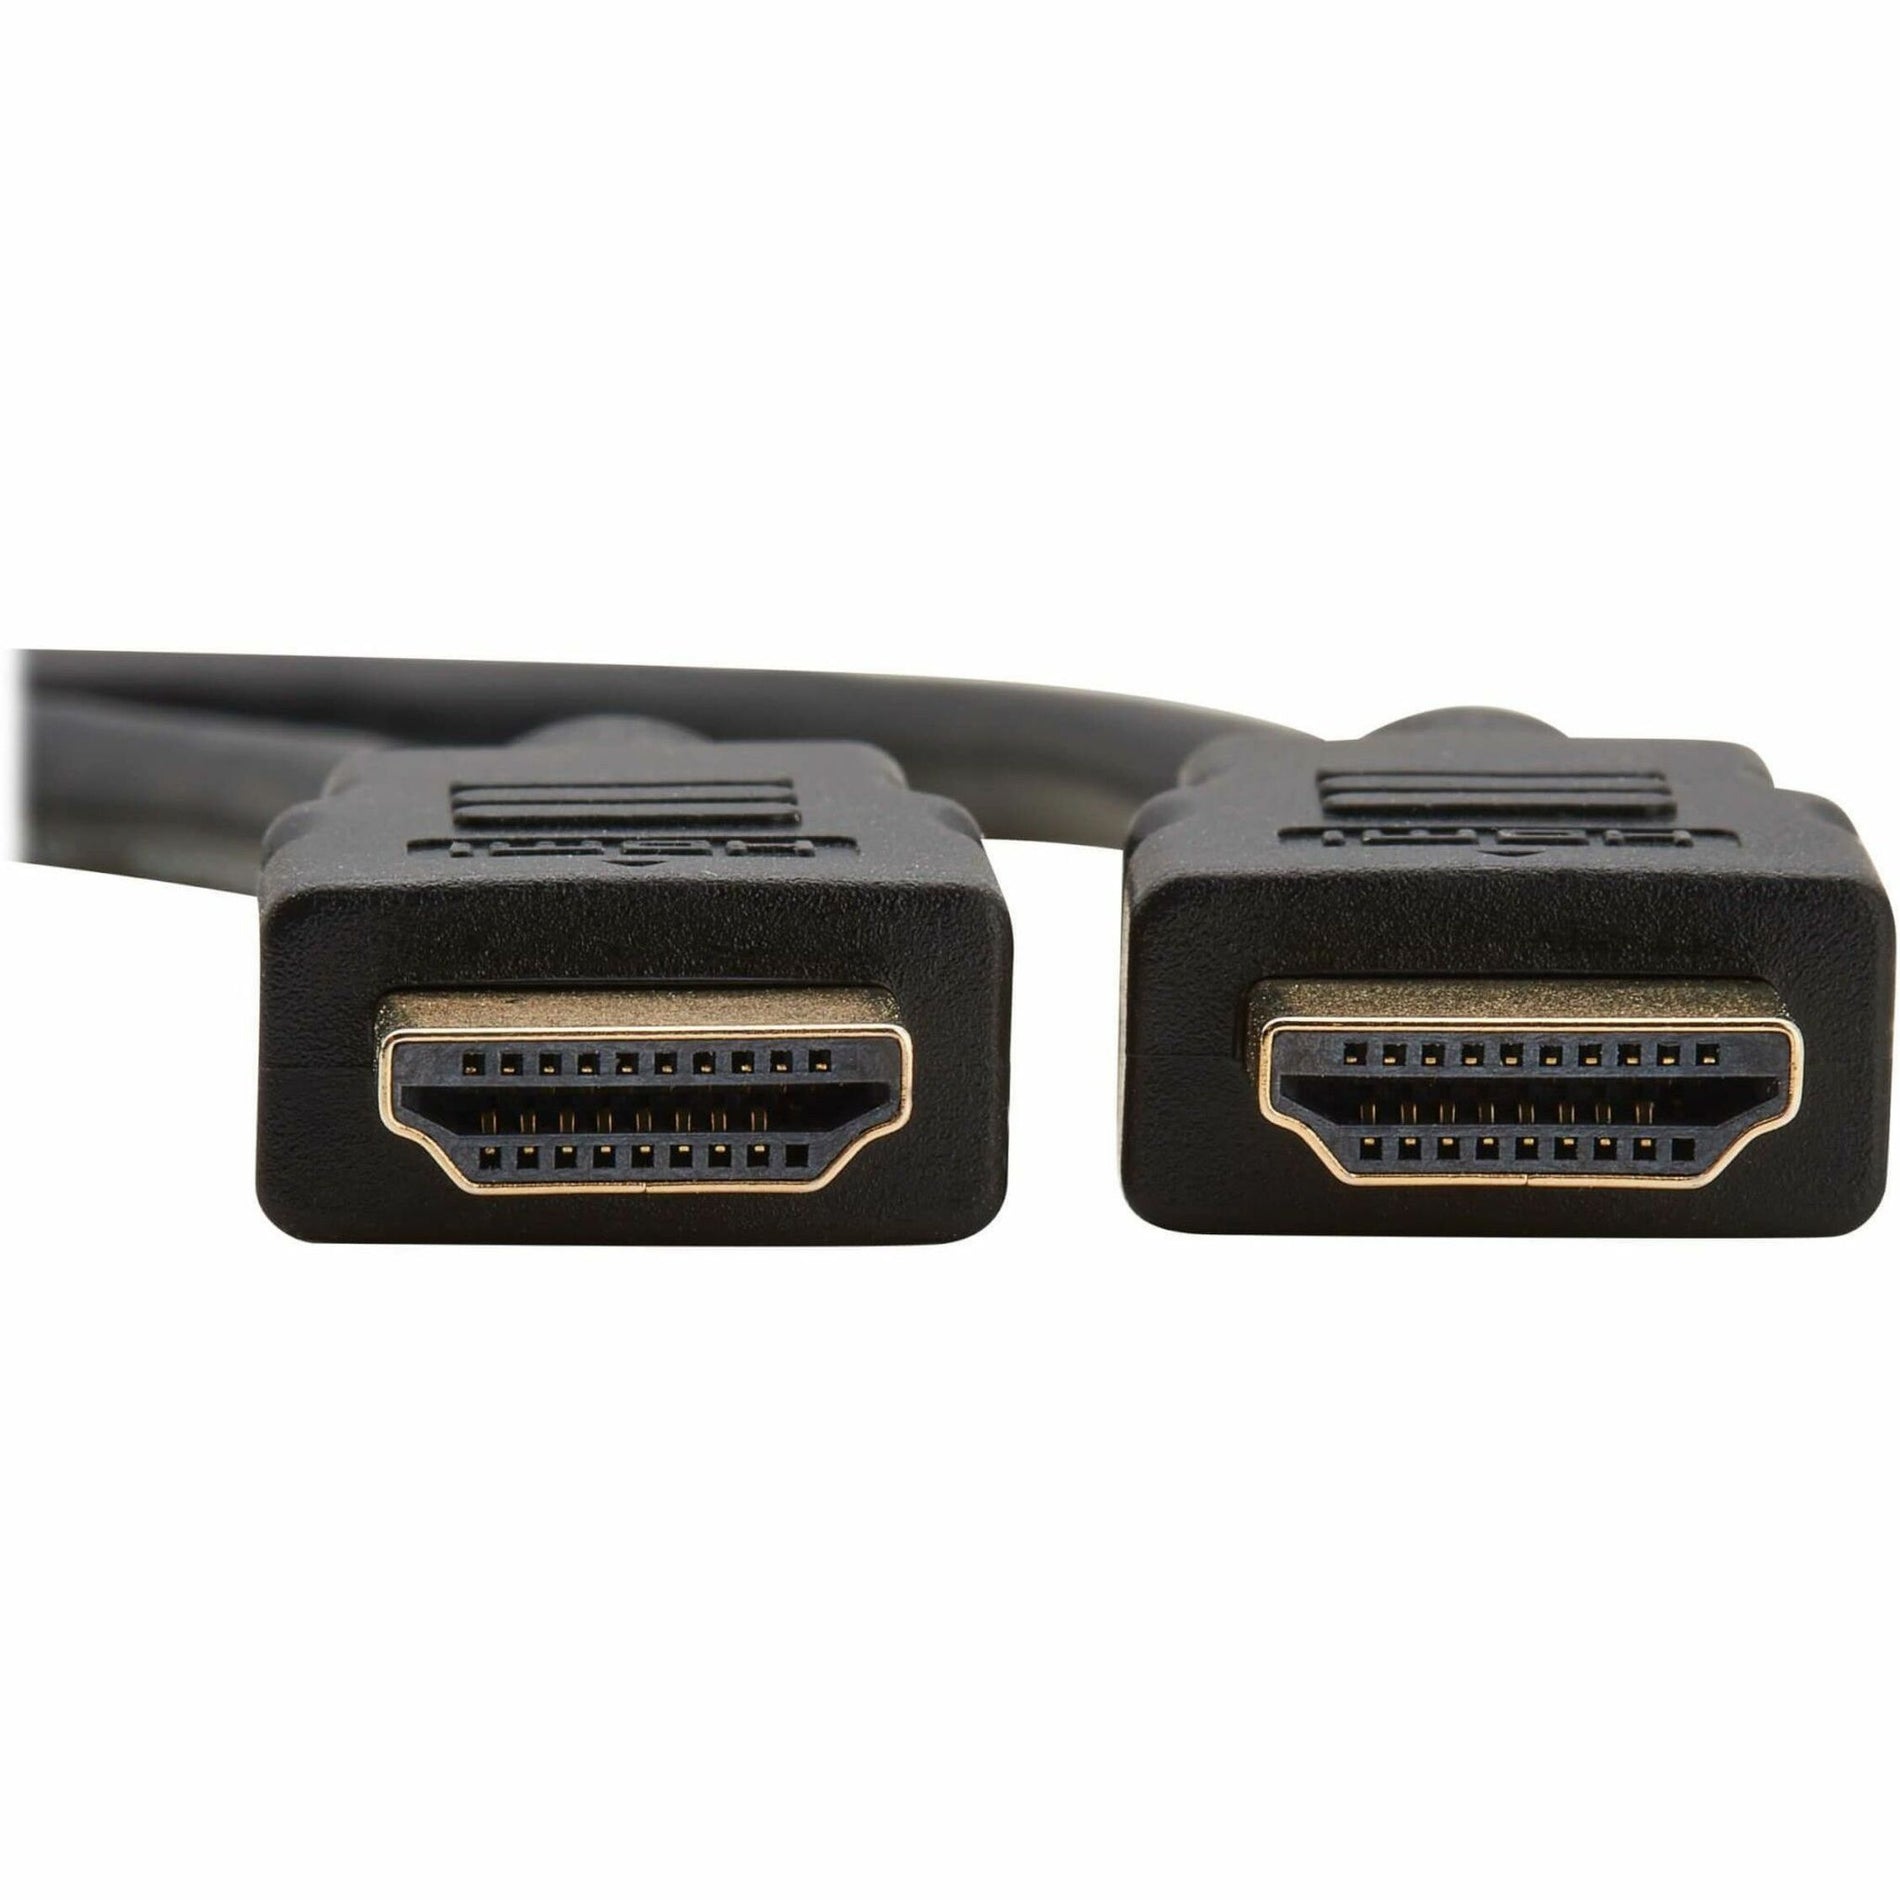 Tripp Lite P568-016 Gold Digital Video Cable, 16 ft HDMI to HDMI, EMI/RF Protection, Gripping Connector